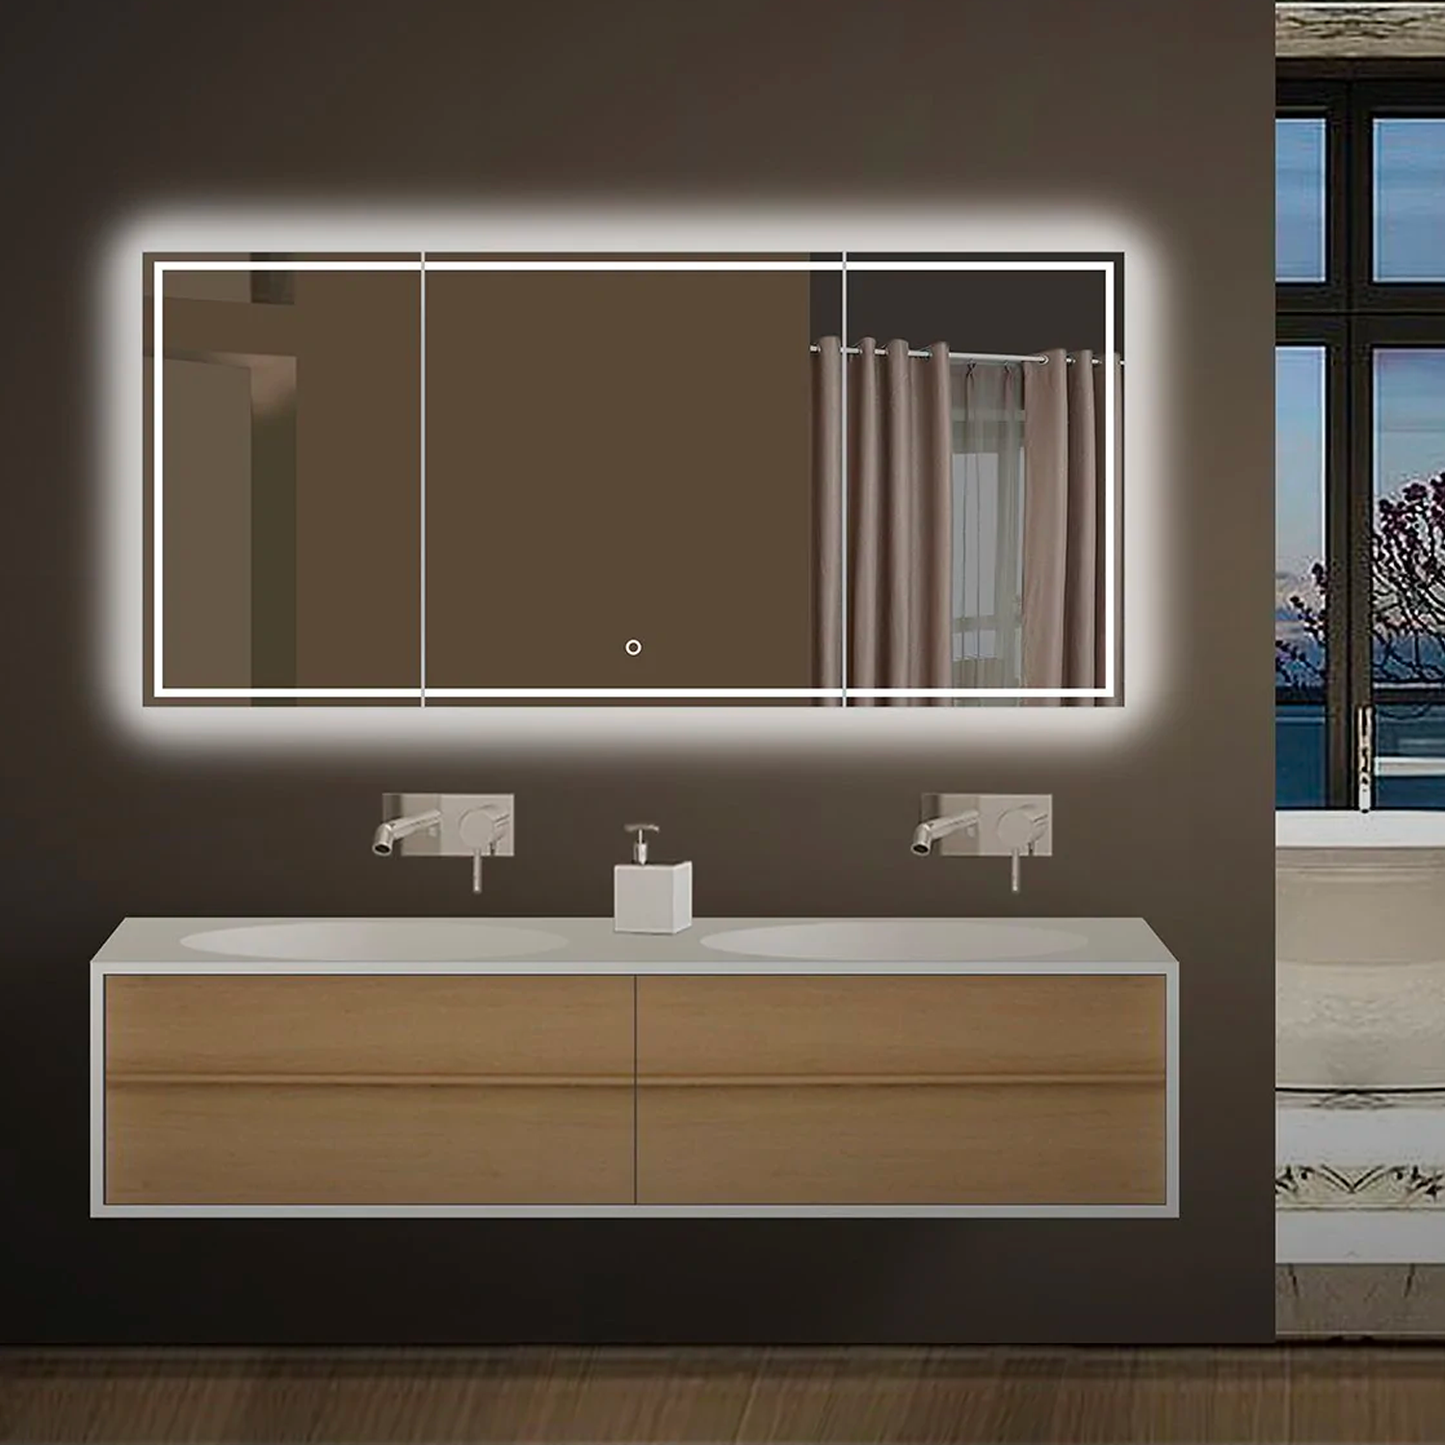 55.1 in. X 25.6 in. Backlit/Frontlit LED Lighted Bathroom Vanity Mirror with Pivoting Side Mirrors, Thin Plexiglass Edge, Anti Fog, Adjustable 3-Color Temperature & Remembrance, Makeup Mirror, Touch Button, Titan Style